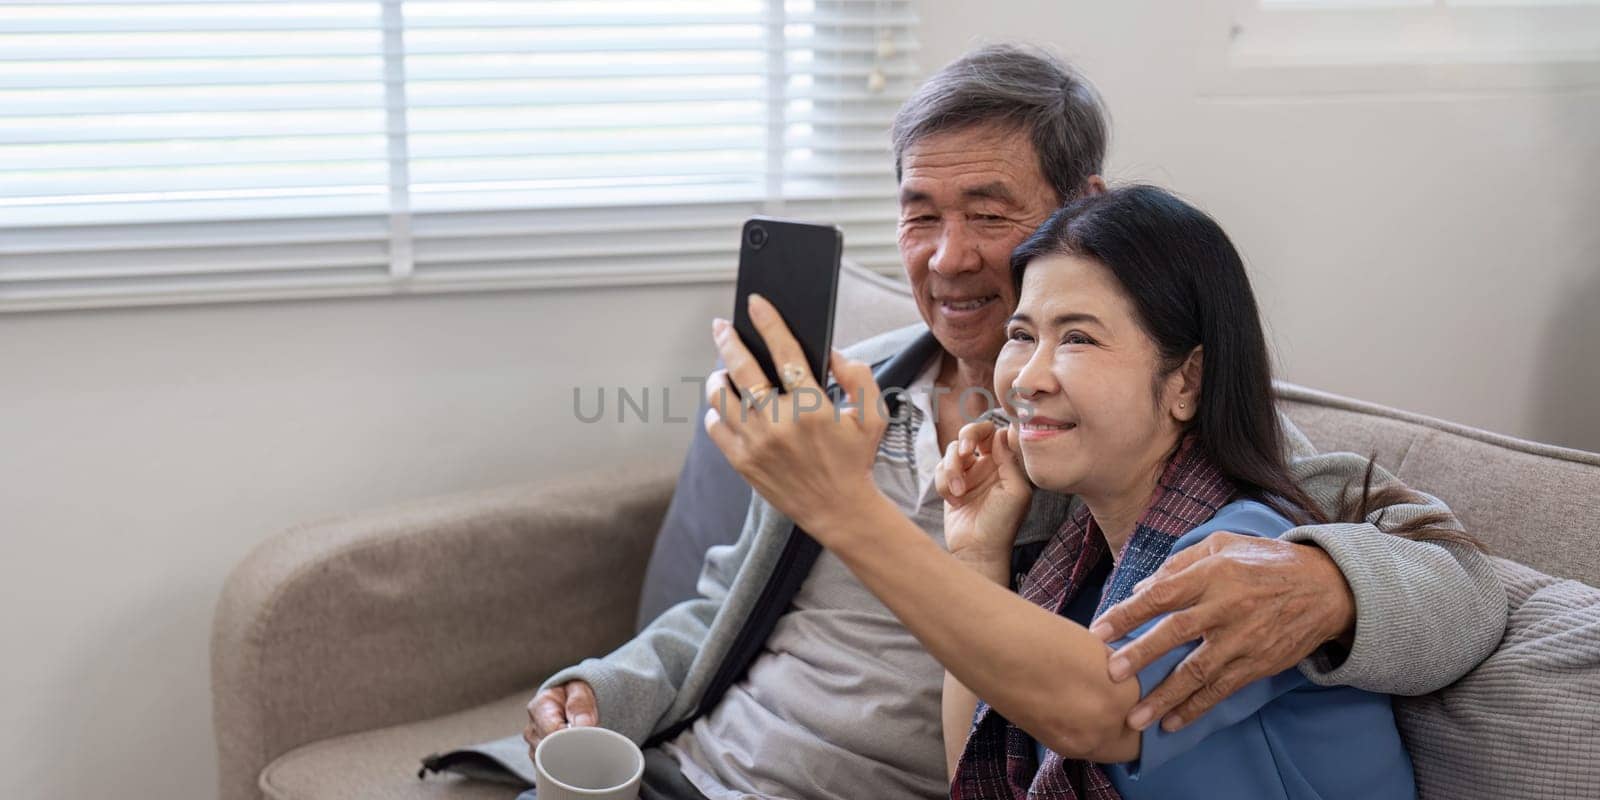 Elderly Couple Taking a Selfie Together at Home, Capturing a Joyful Moment of Love and Companionship in a Cozy Living Room Setting by nateemee